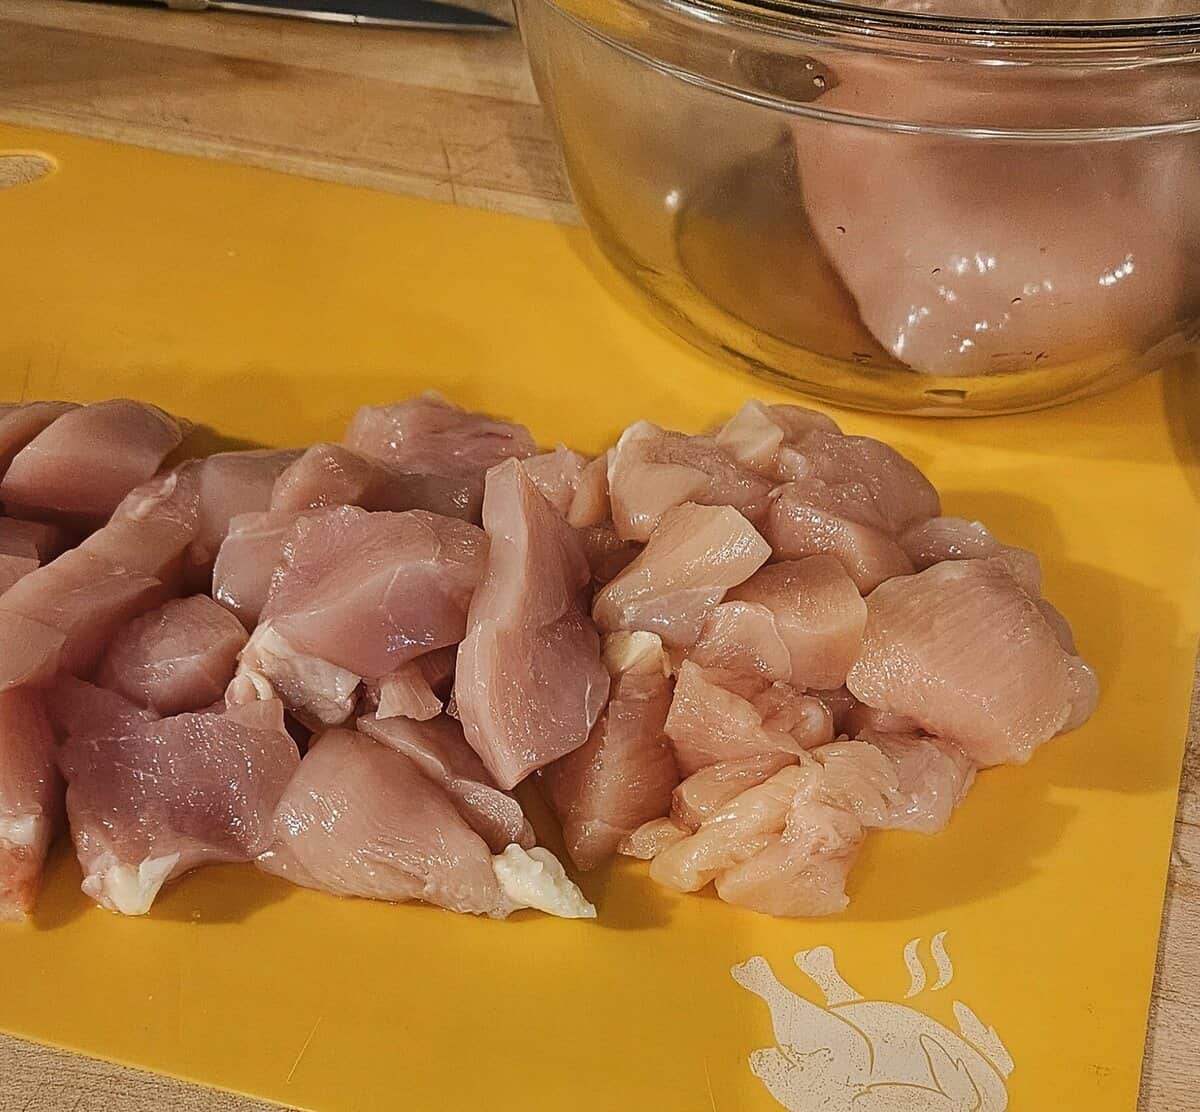 chicken cut into bite sized chunks for chicken cobbler.